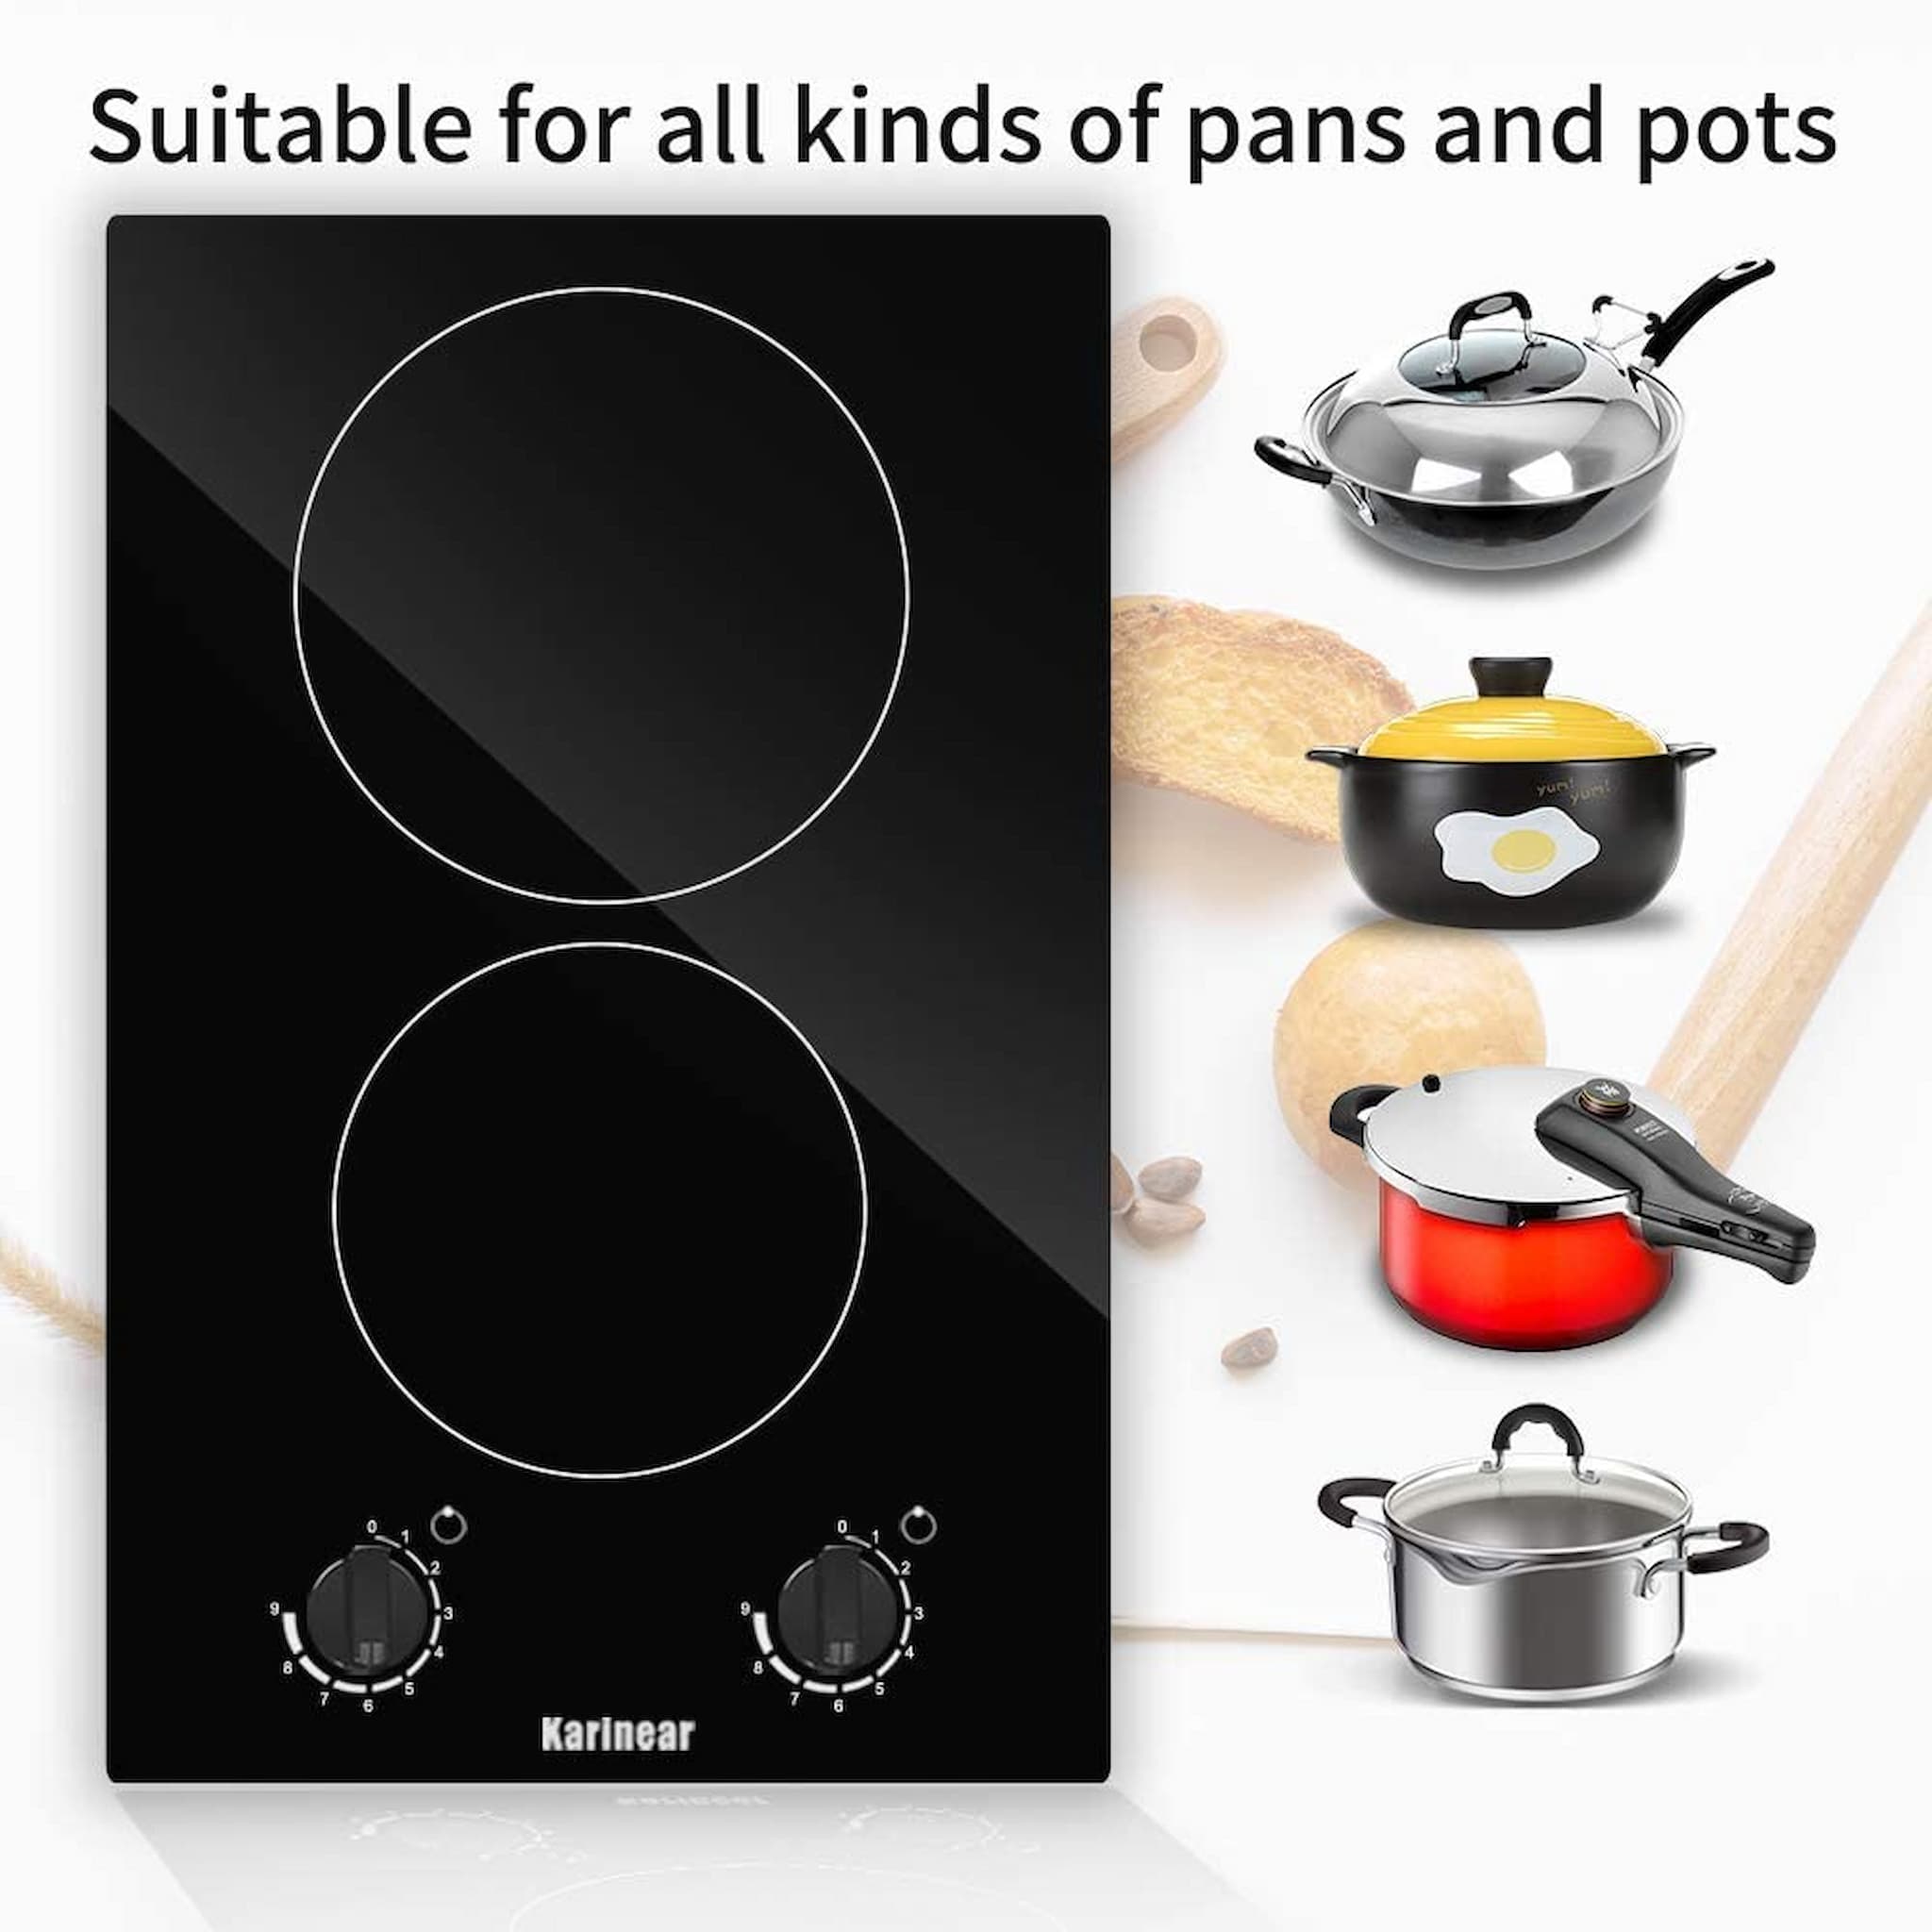 2000W Portable Cooktop Dual Burner Cast Iron Electric Stove for Kitchen  Cooking